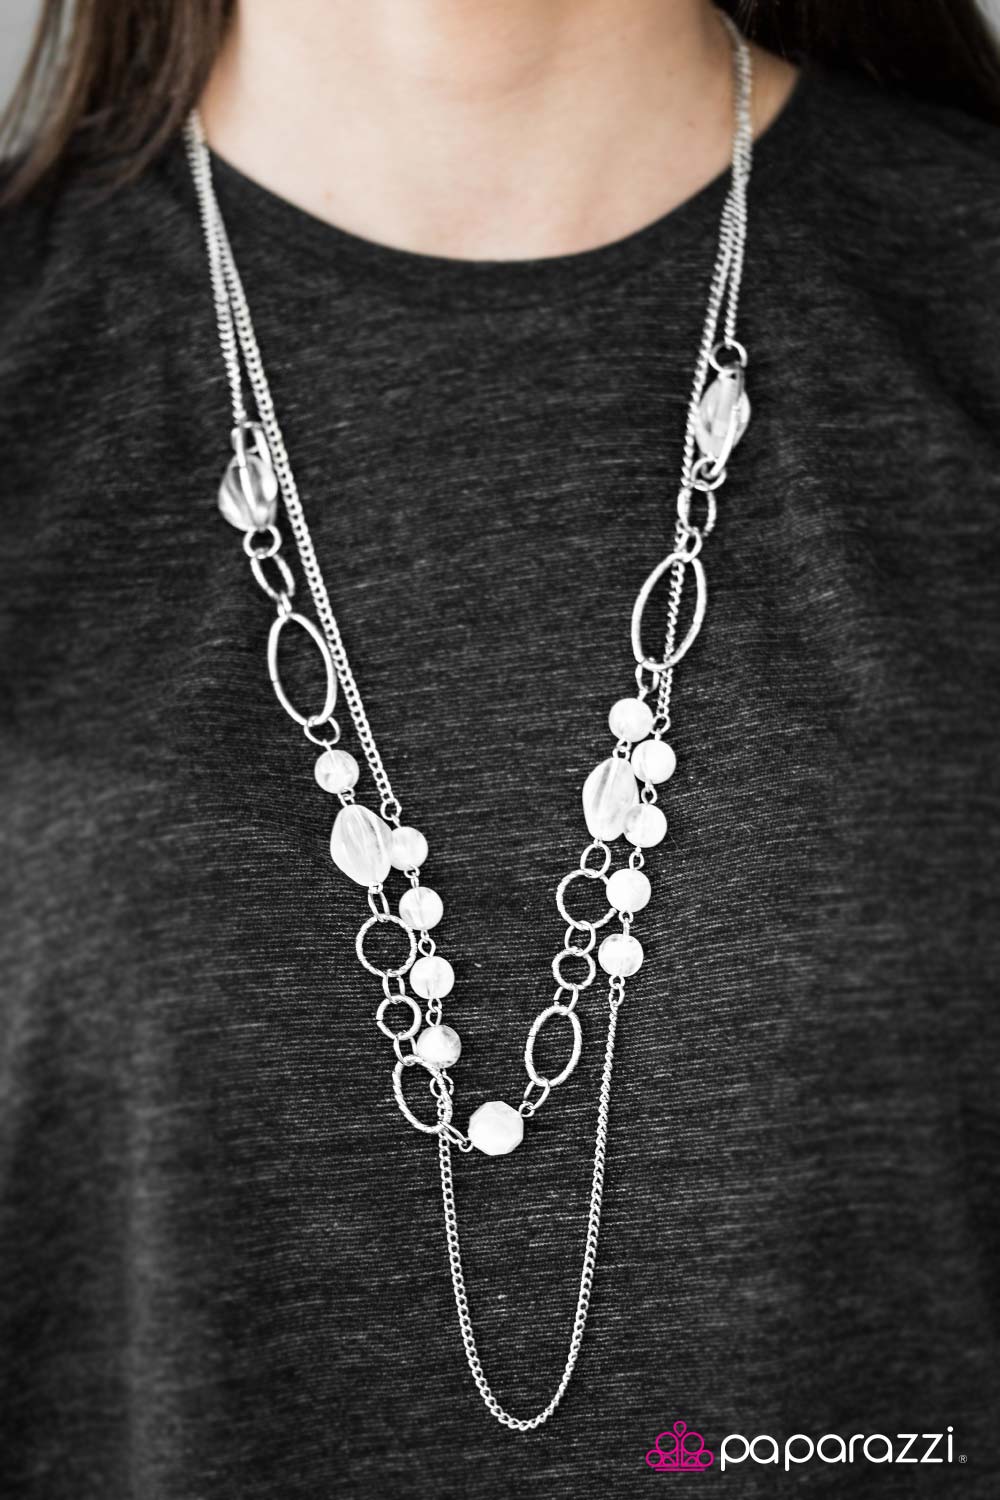 Touch The Clouds - Paparazzi necklace